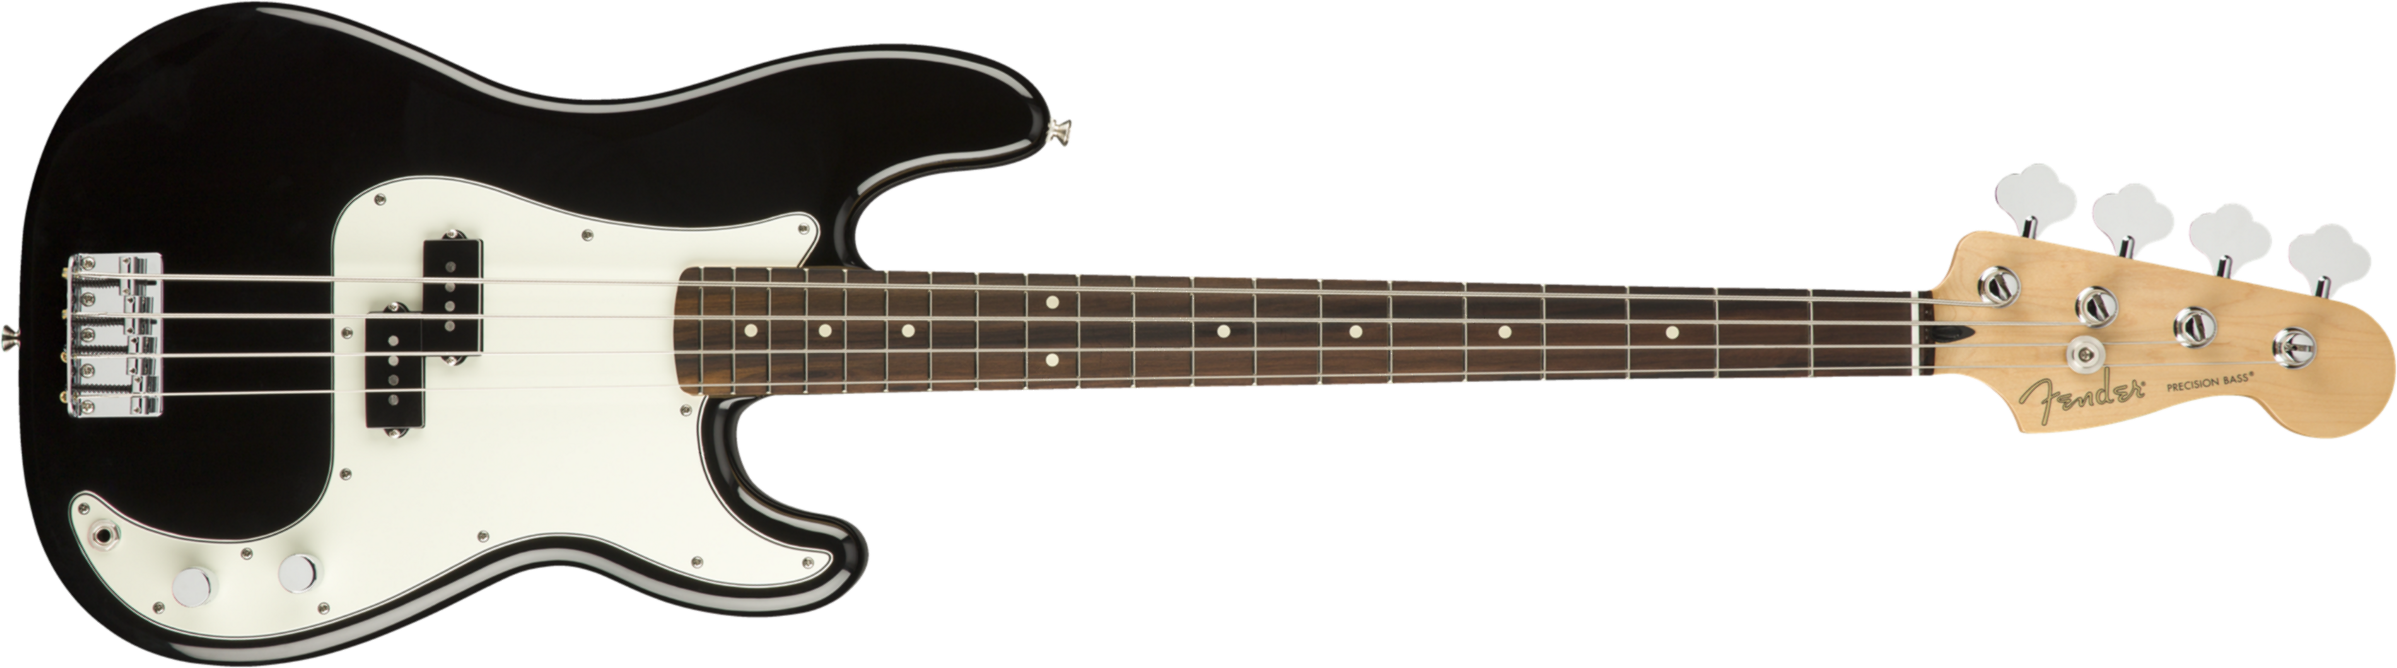 Fender Precision Bass Player Mex Pf - Black - Solid body electric bass - Main picture